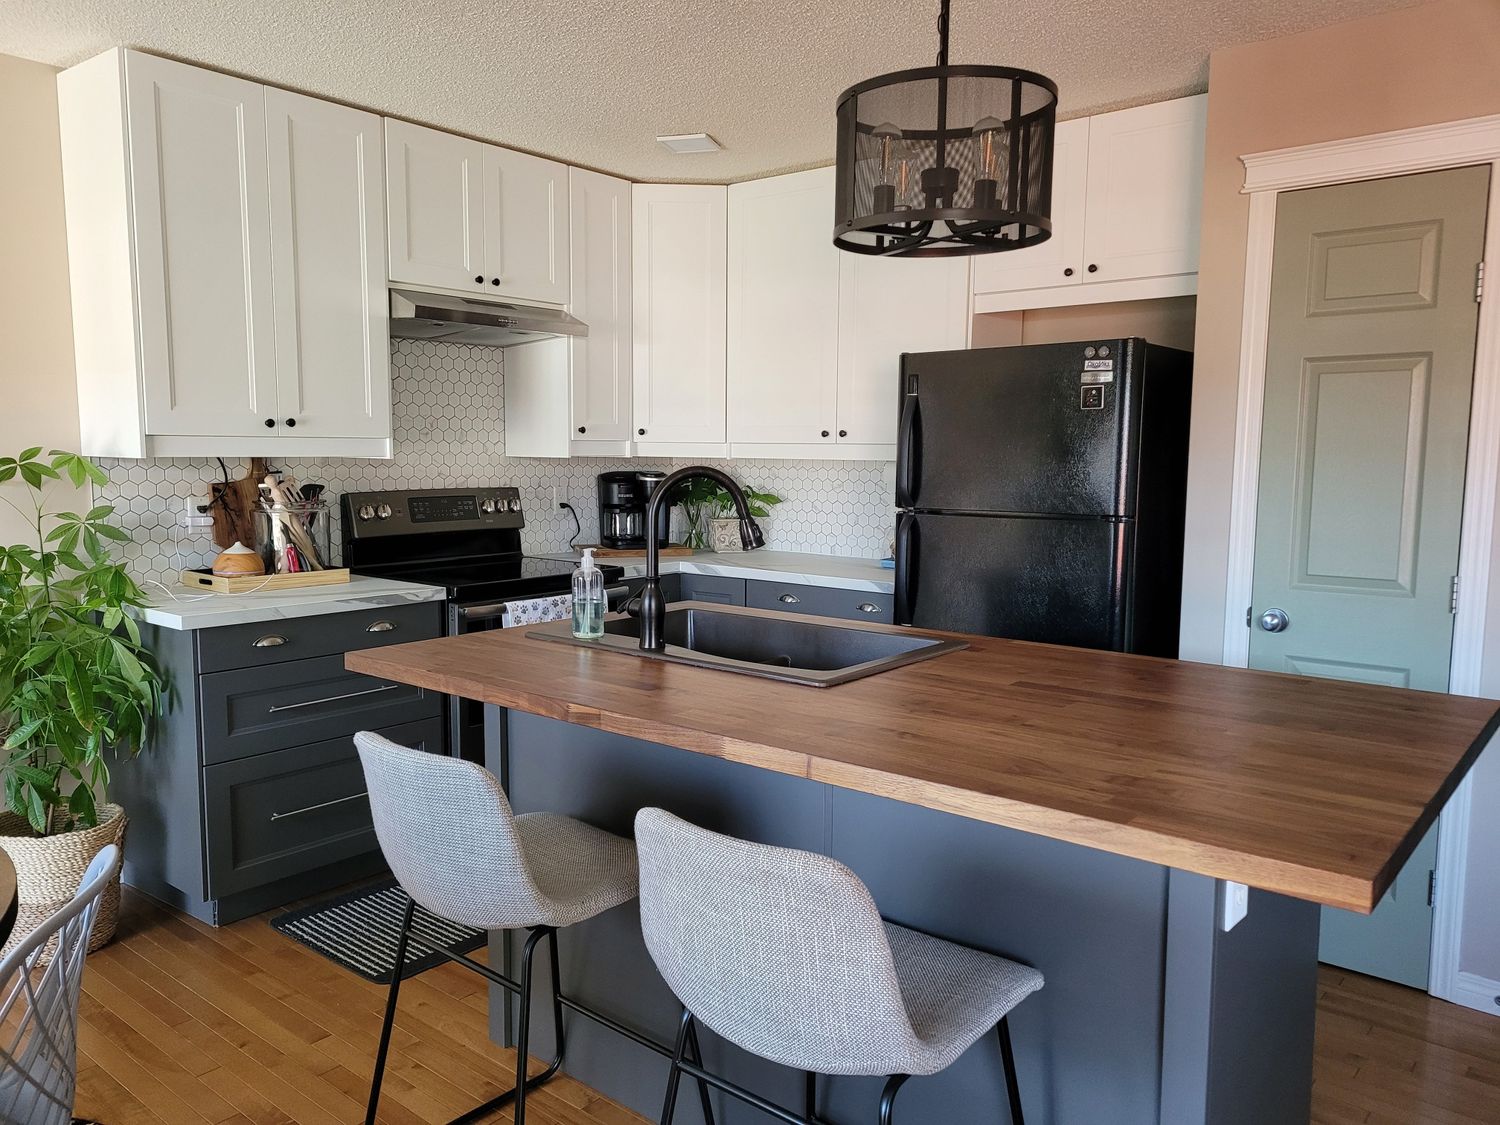 Gallery Photo of The kitchen is the central part of a home. Organization can improve time management, reduce stress, and improve family relationships.